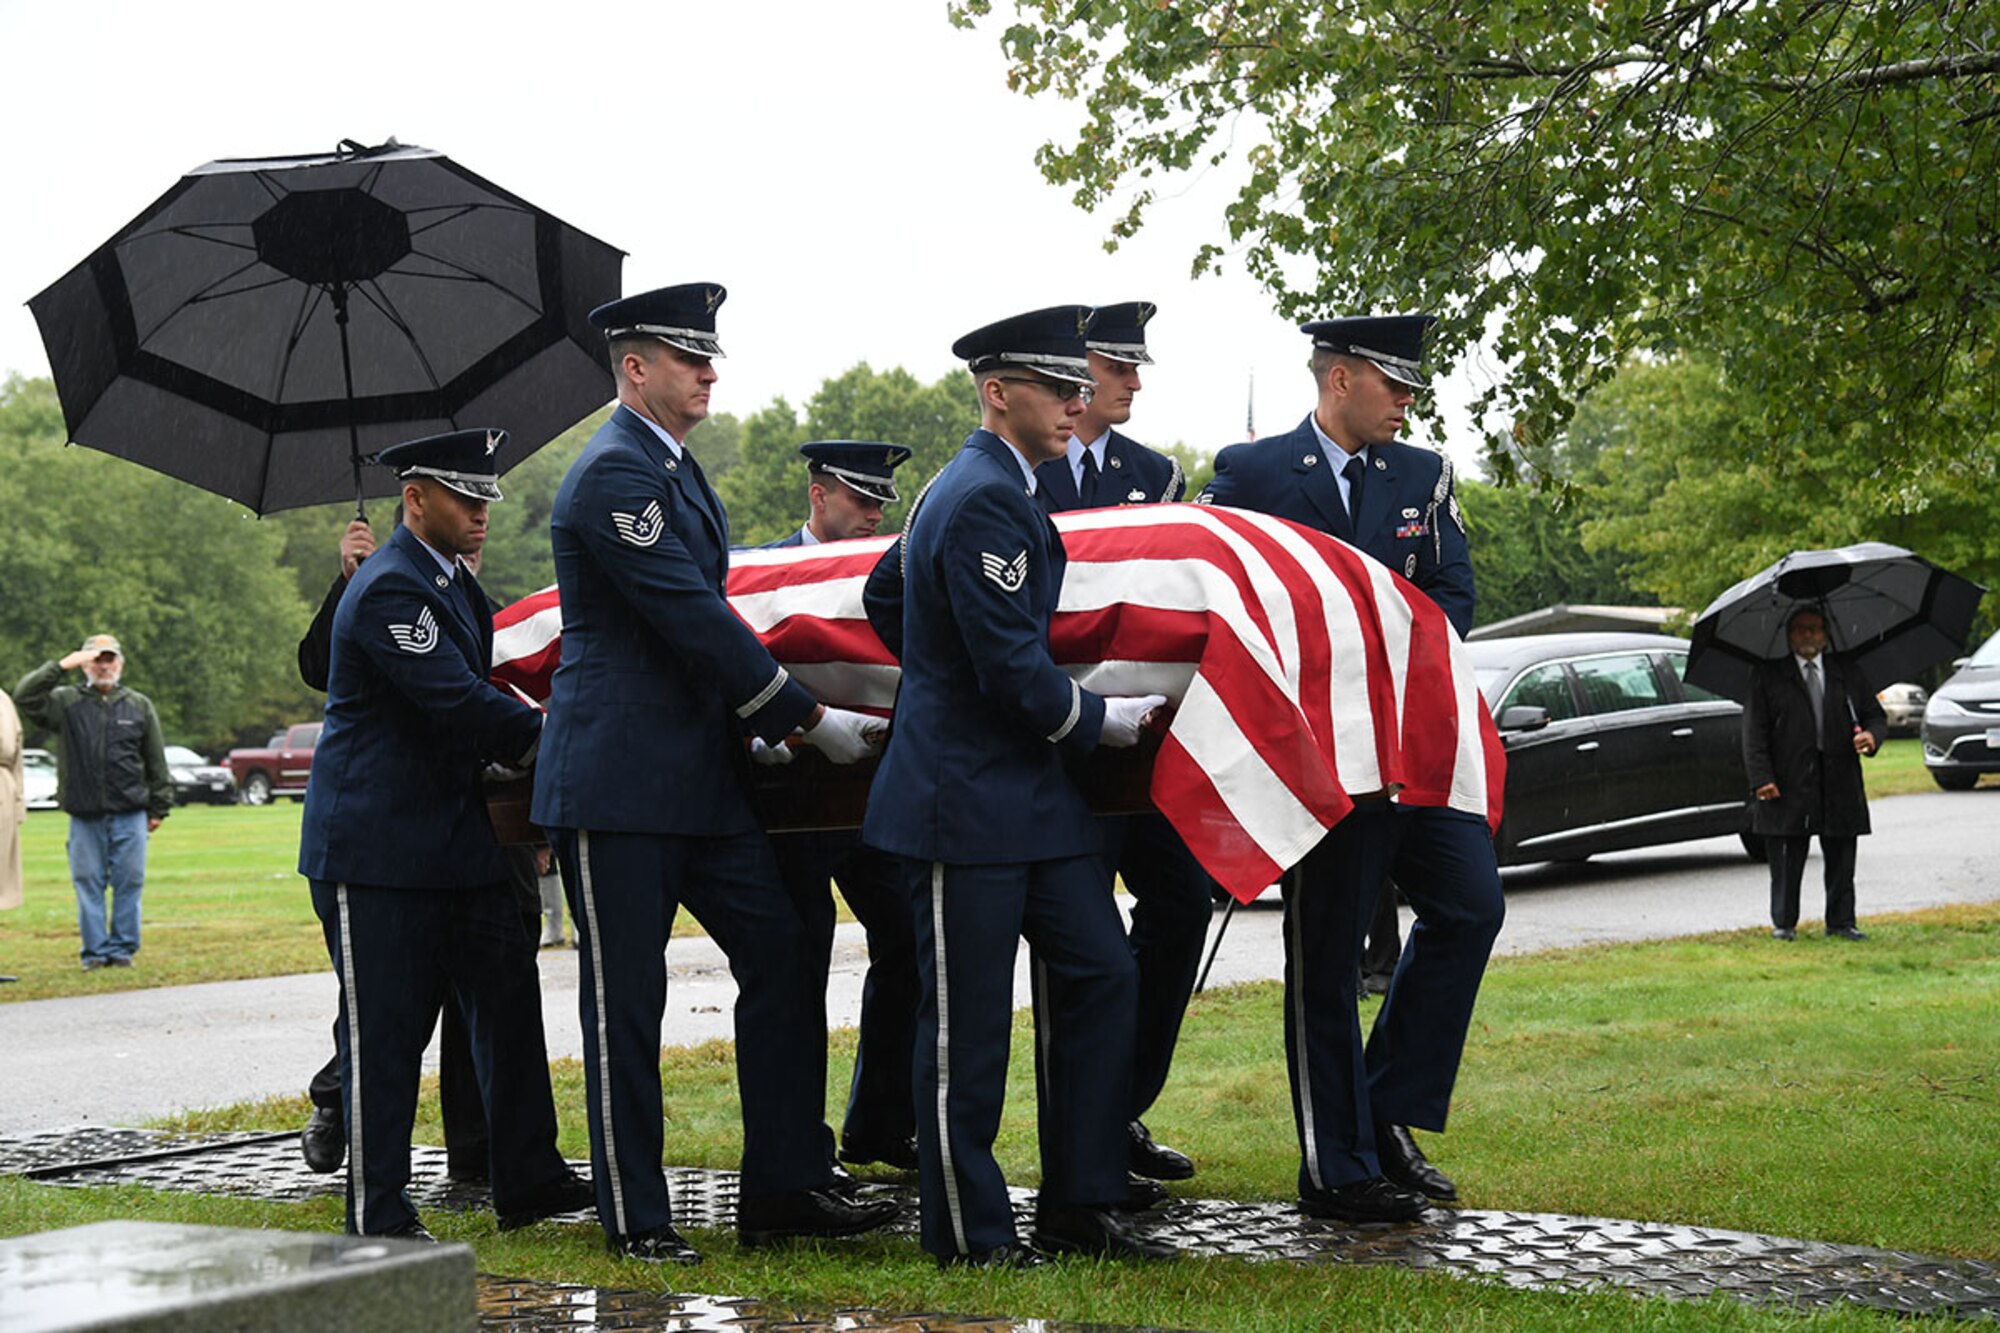 Members of the Hanscom Air Force Base, Mass. Patriot Honor Guard carry the remains of U.S. Air Force Col. Fredric M. Mellor as he is laid to rest at Rhode Island Veterans Memorial Cemetery Sept. 28.